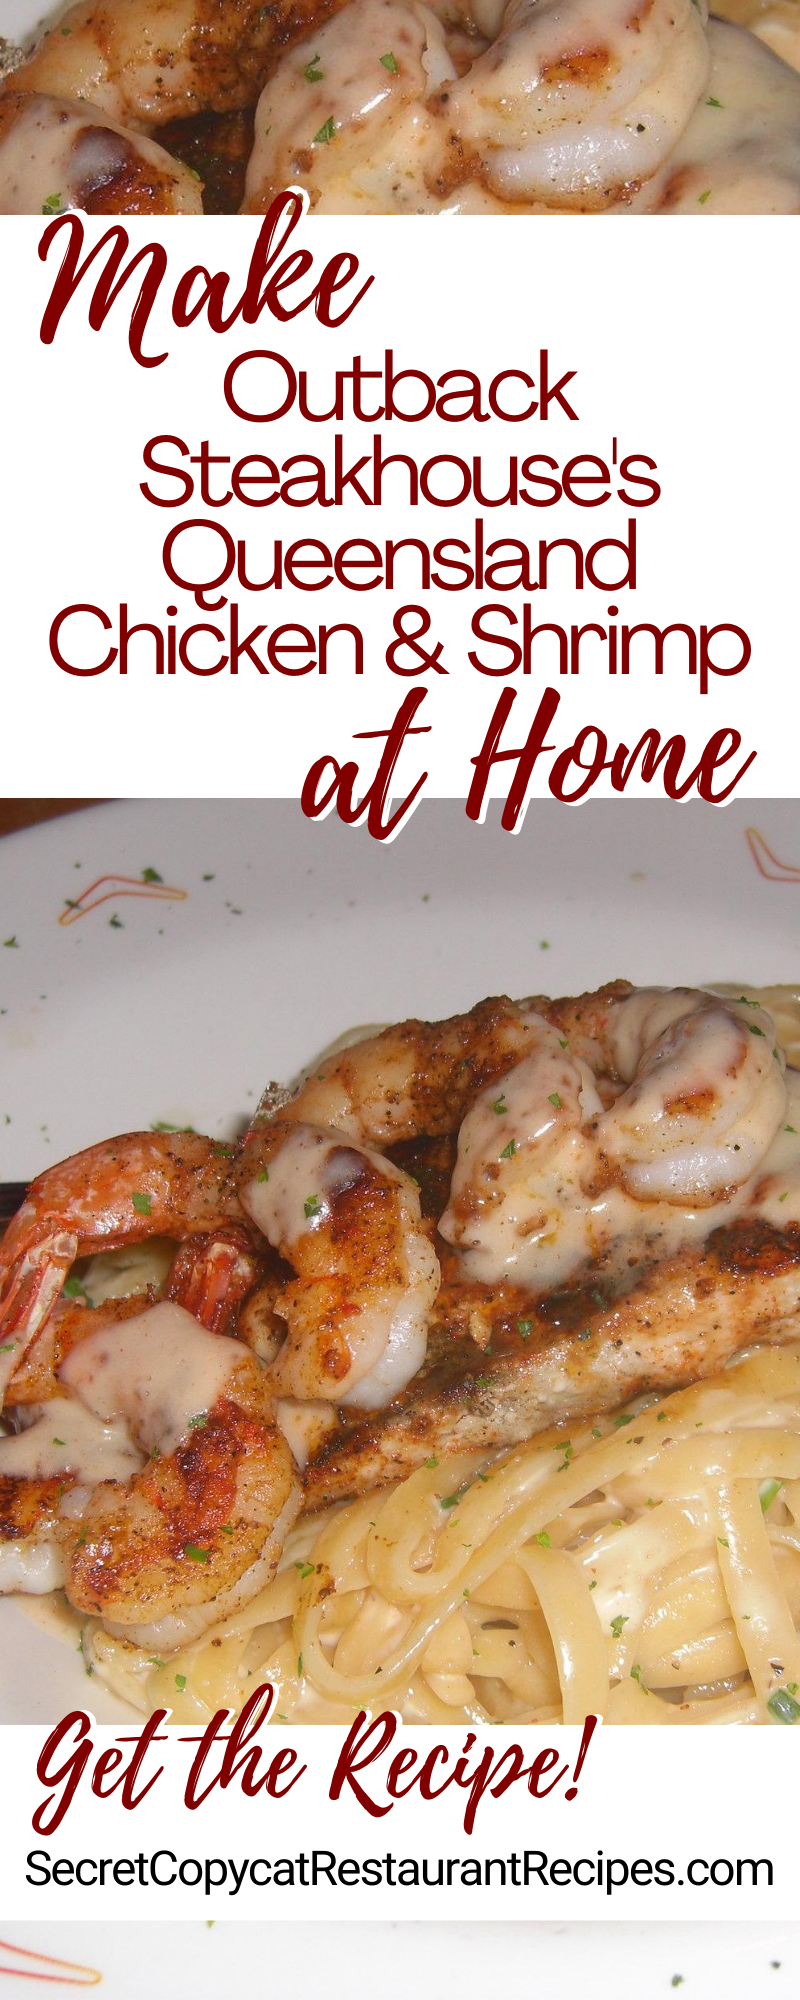 Outback Steakhouse Queenland Chicken and Shrimp Recipe